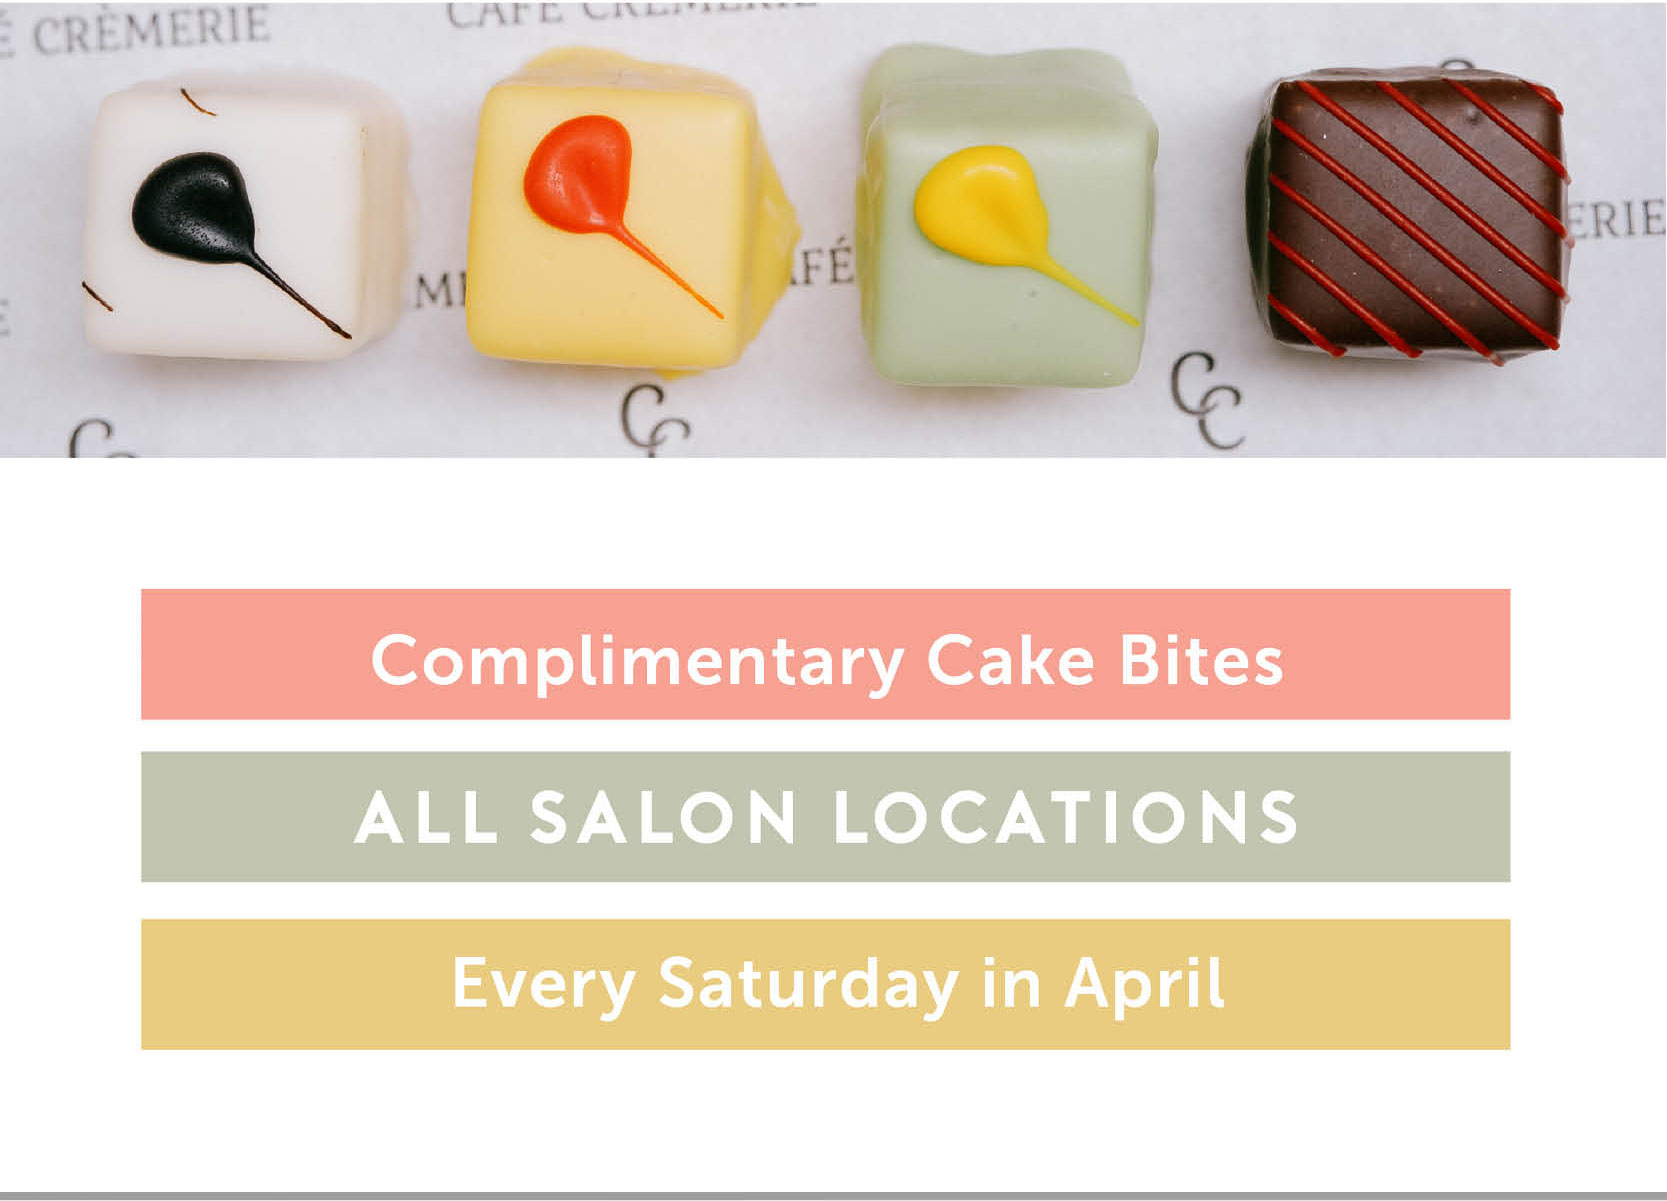 Complimentary cake bites all salon locations every Saturday in April